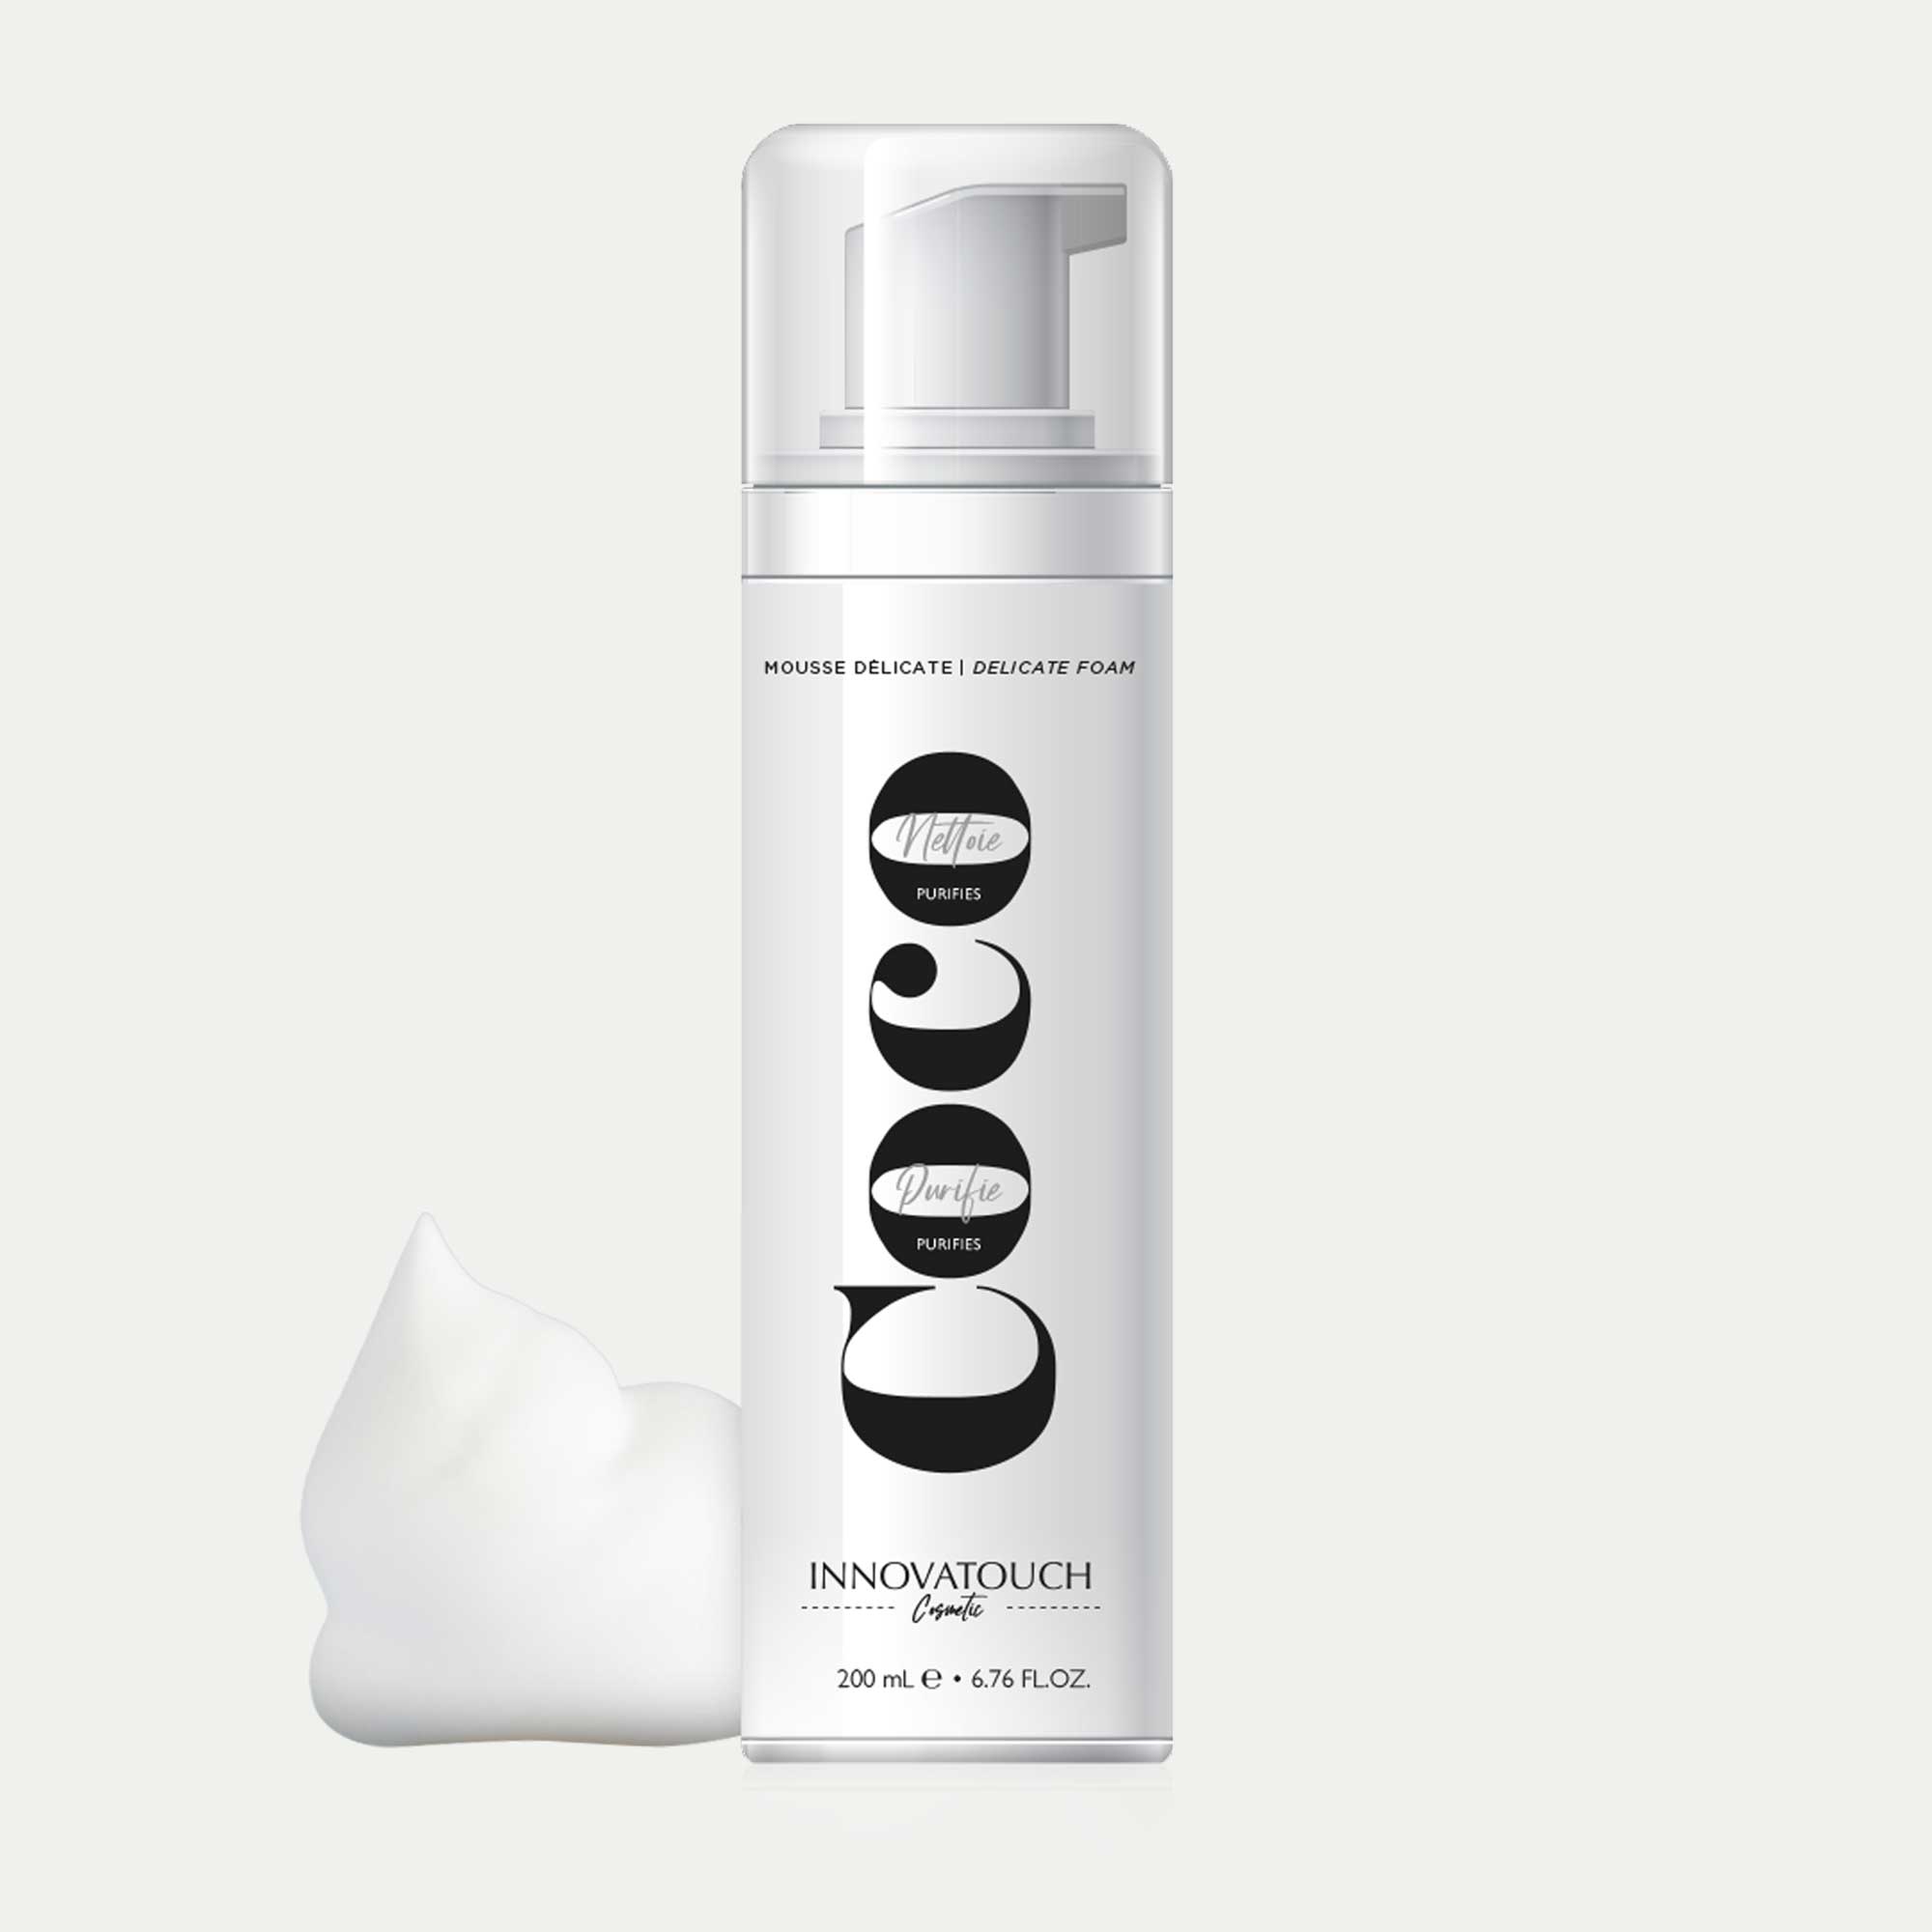 COCO-mousse-delicate-innovatouch-cosmetic